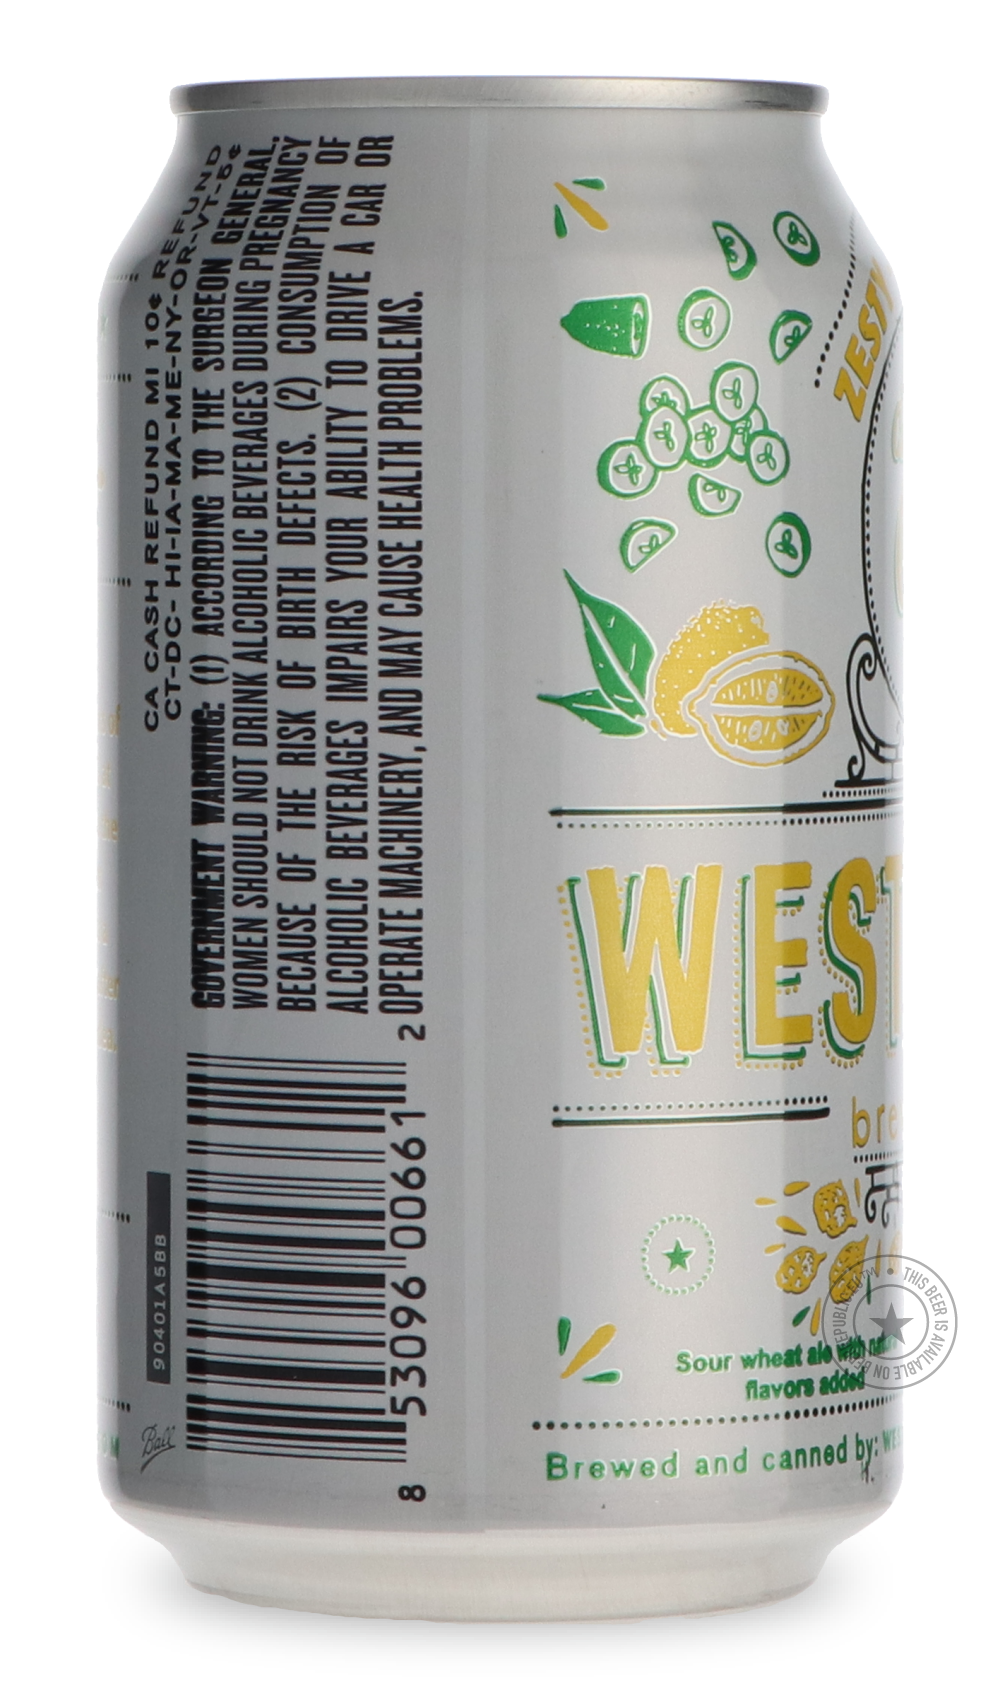 -Westbrook- Lemon Cucumber Gose-Sour / Wild & Fruity- Only @ Beer Republic - The best online beer store for American & Canadian craft beer - Buy beer online from the USA and Canada - Bier online kopen - Amerikaans bier kopen - Craft beer store - Craft beer kopen - Amerikanisch bier kaufen - Bier online kaufen - Acheter biere online - IPA - Stout - Porter - New England IPA - Hazy IPA - Imperial Stout - Barrel Aged - Barrel Aged Imperial Stout - Brown - Dark beer - Blond - Blonde - Pilsner - Lager - Wheat - W